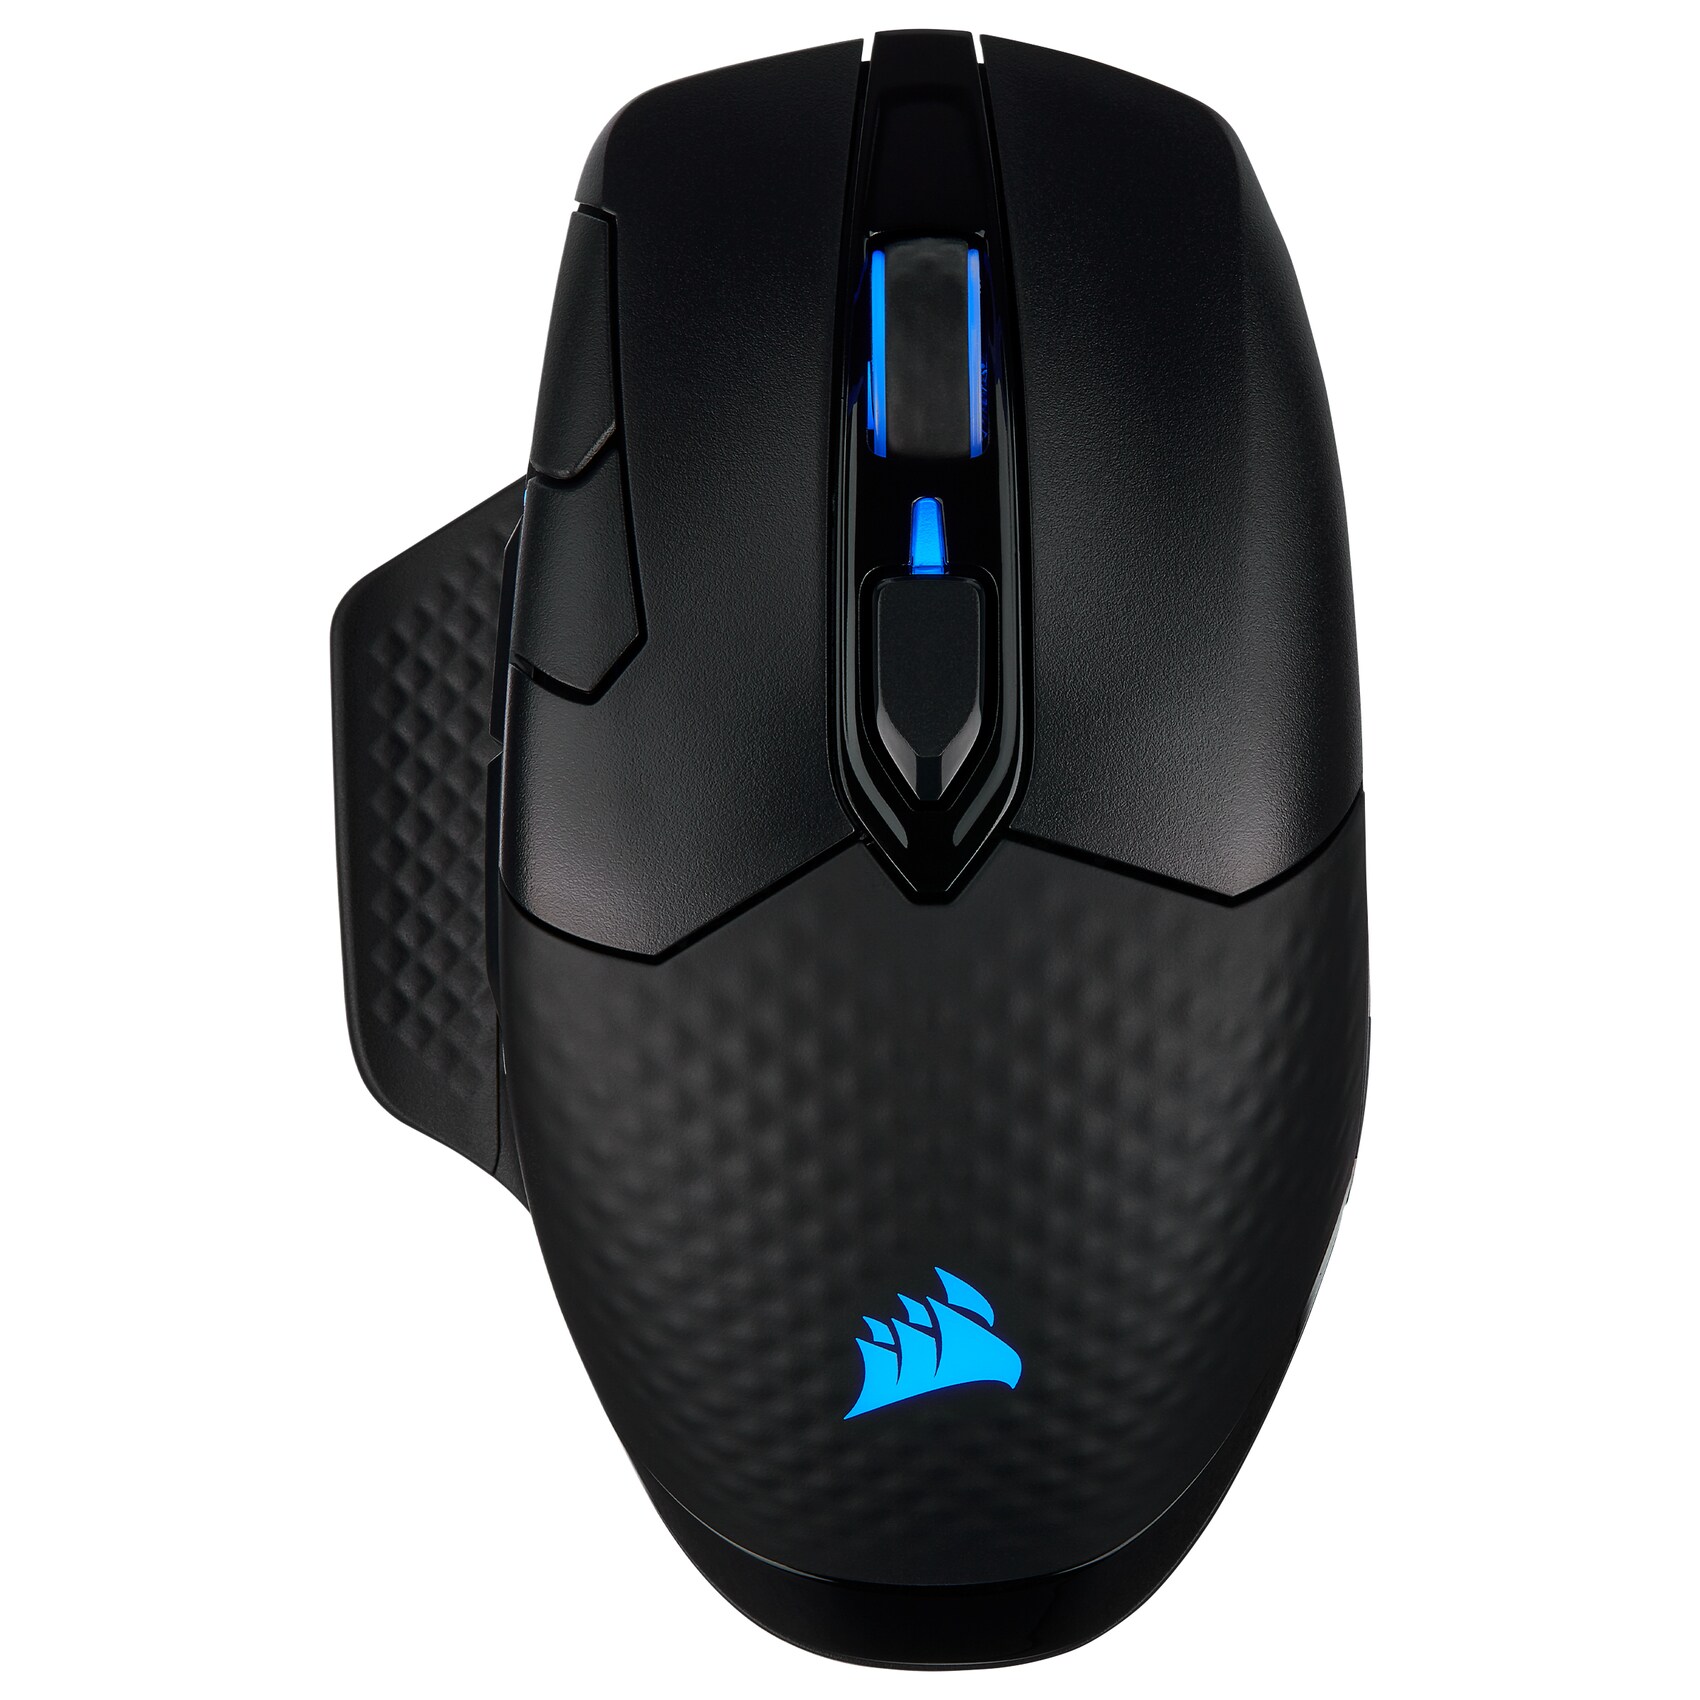 Buy Corsair Dark Core Rgb Pro Se Wireless Fps Moba Gaming Mouse With Slipstream Technology Black Backlit Rgb Led Dpi Optical Qi Wireless Charging Certified Online Shop Electronics Appliances On